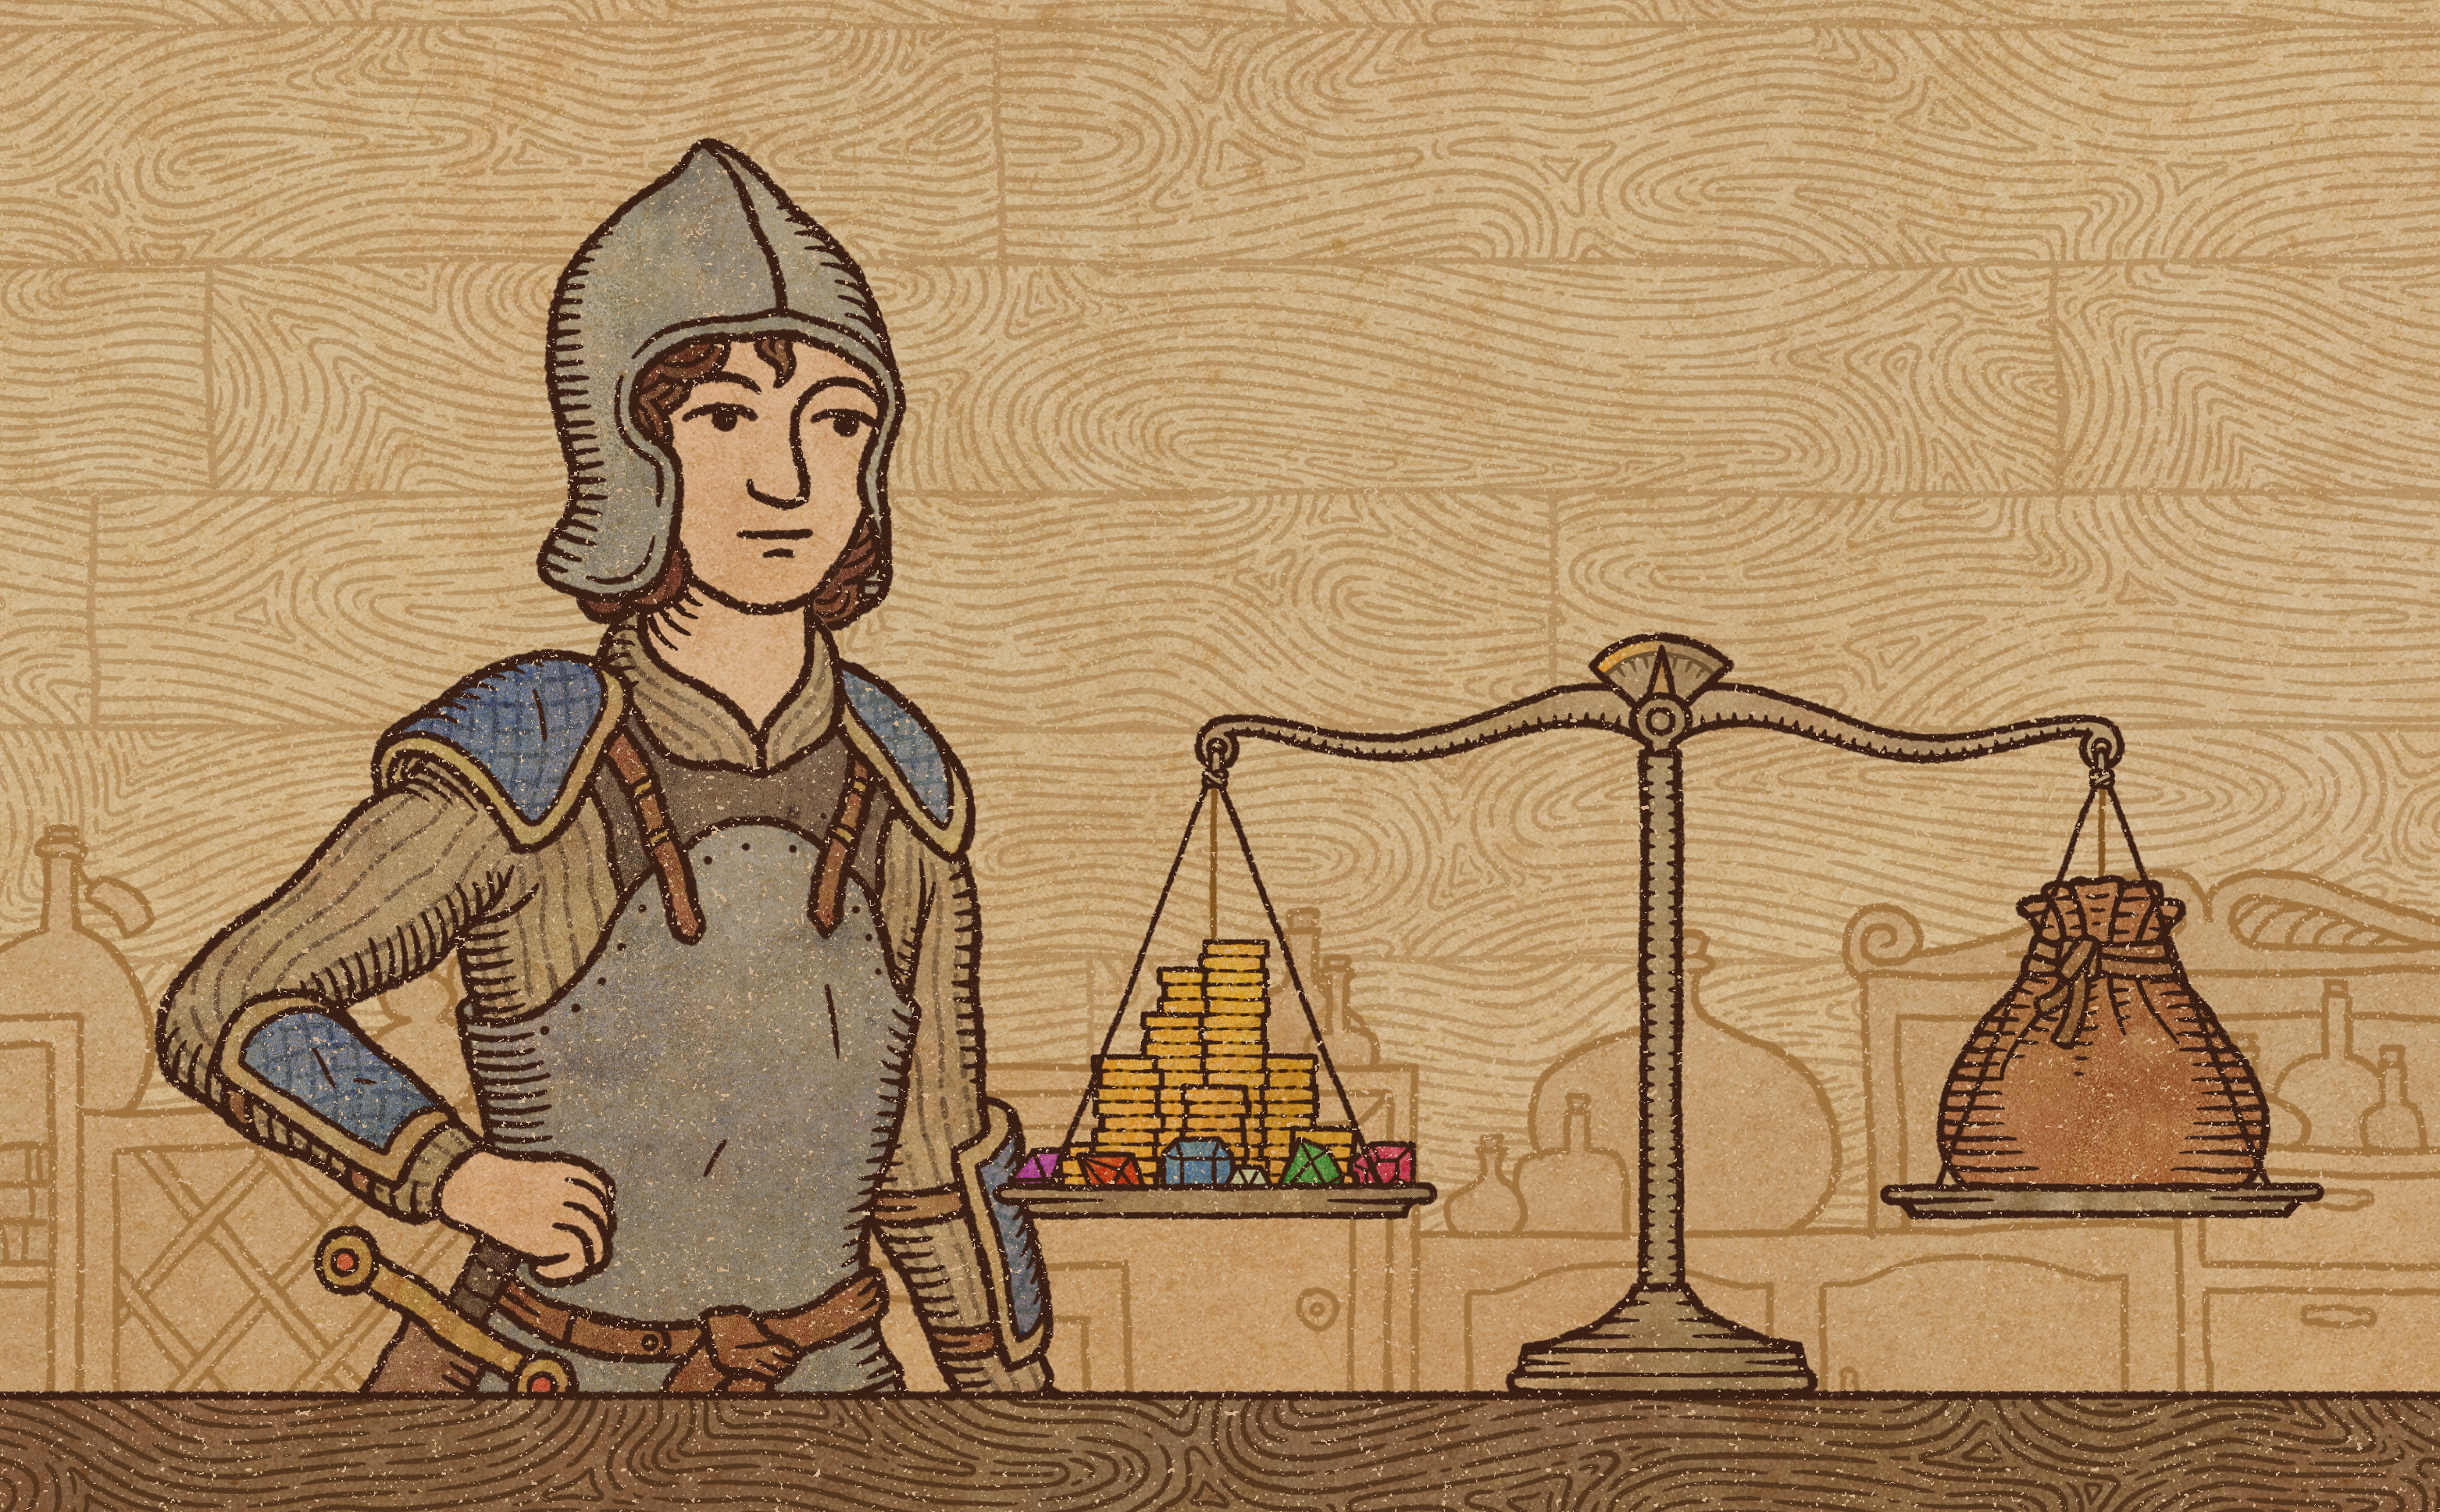 HD desktop wallpaper featuring a medieval alchemist from Potion Craft: Alchemist Simulator game, with a balance scale and potion ingredients in the background.